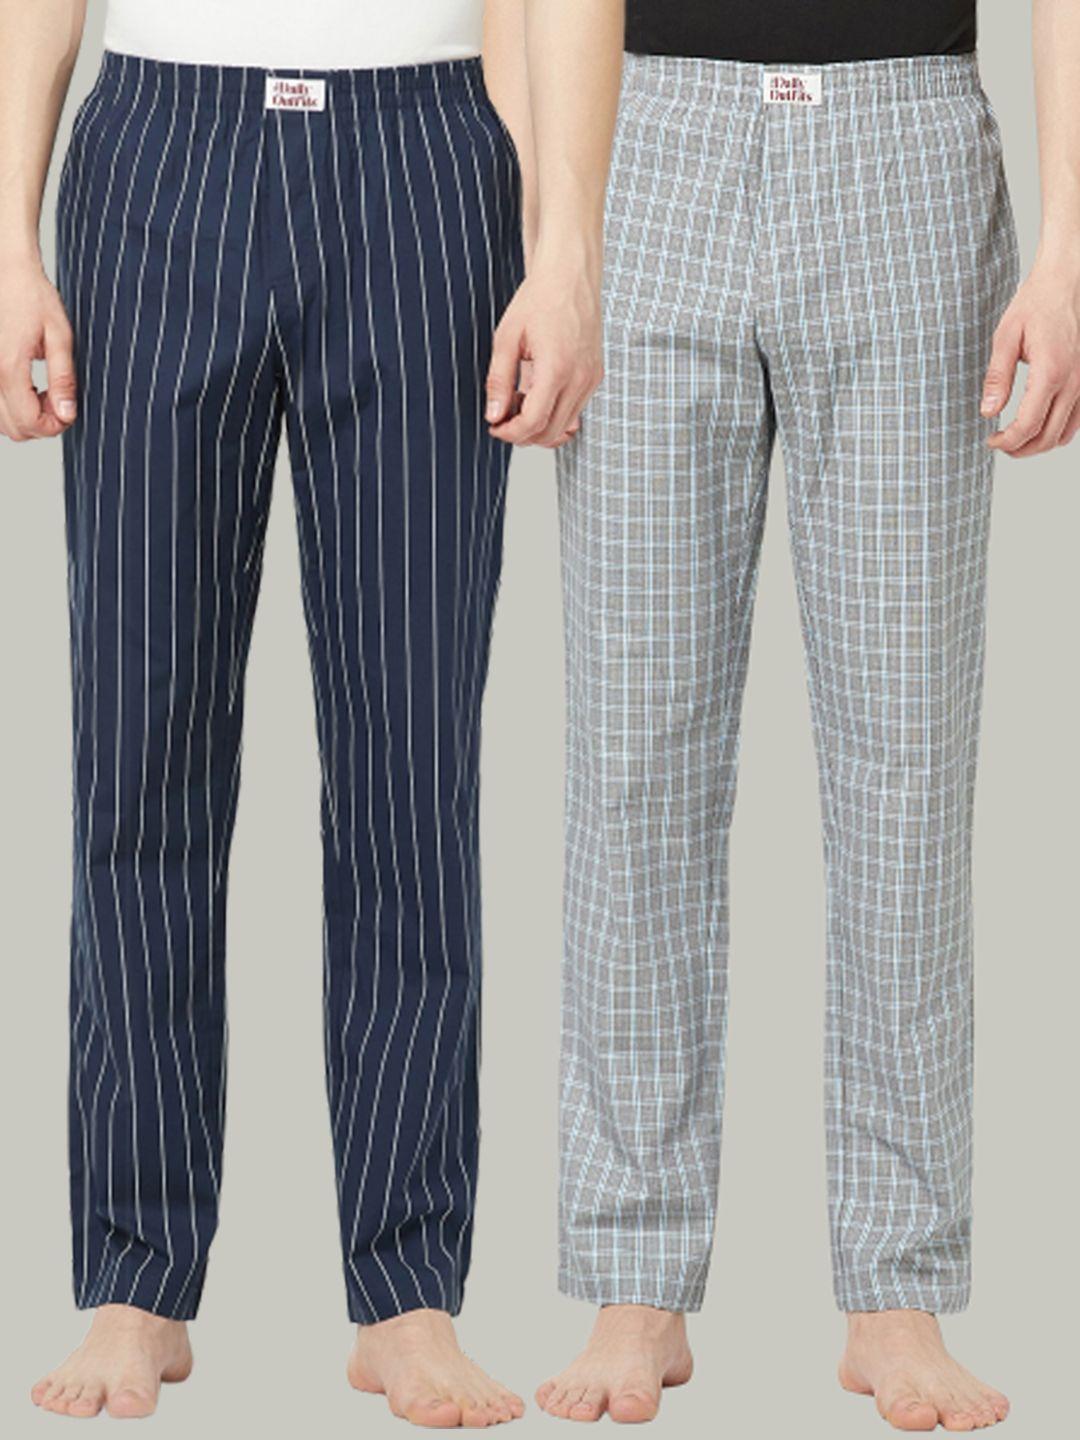 the daily outfits men pack of 2 cotton lounge pants